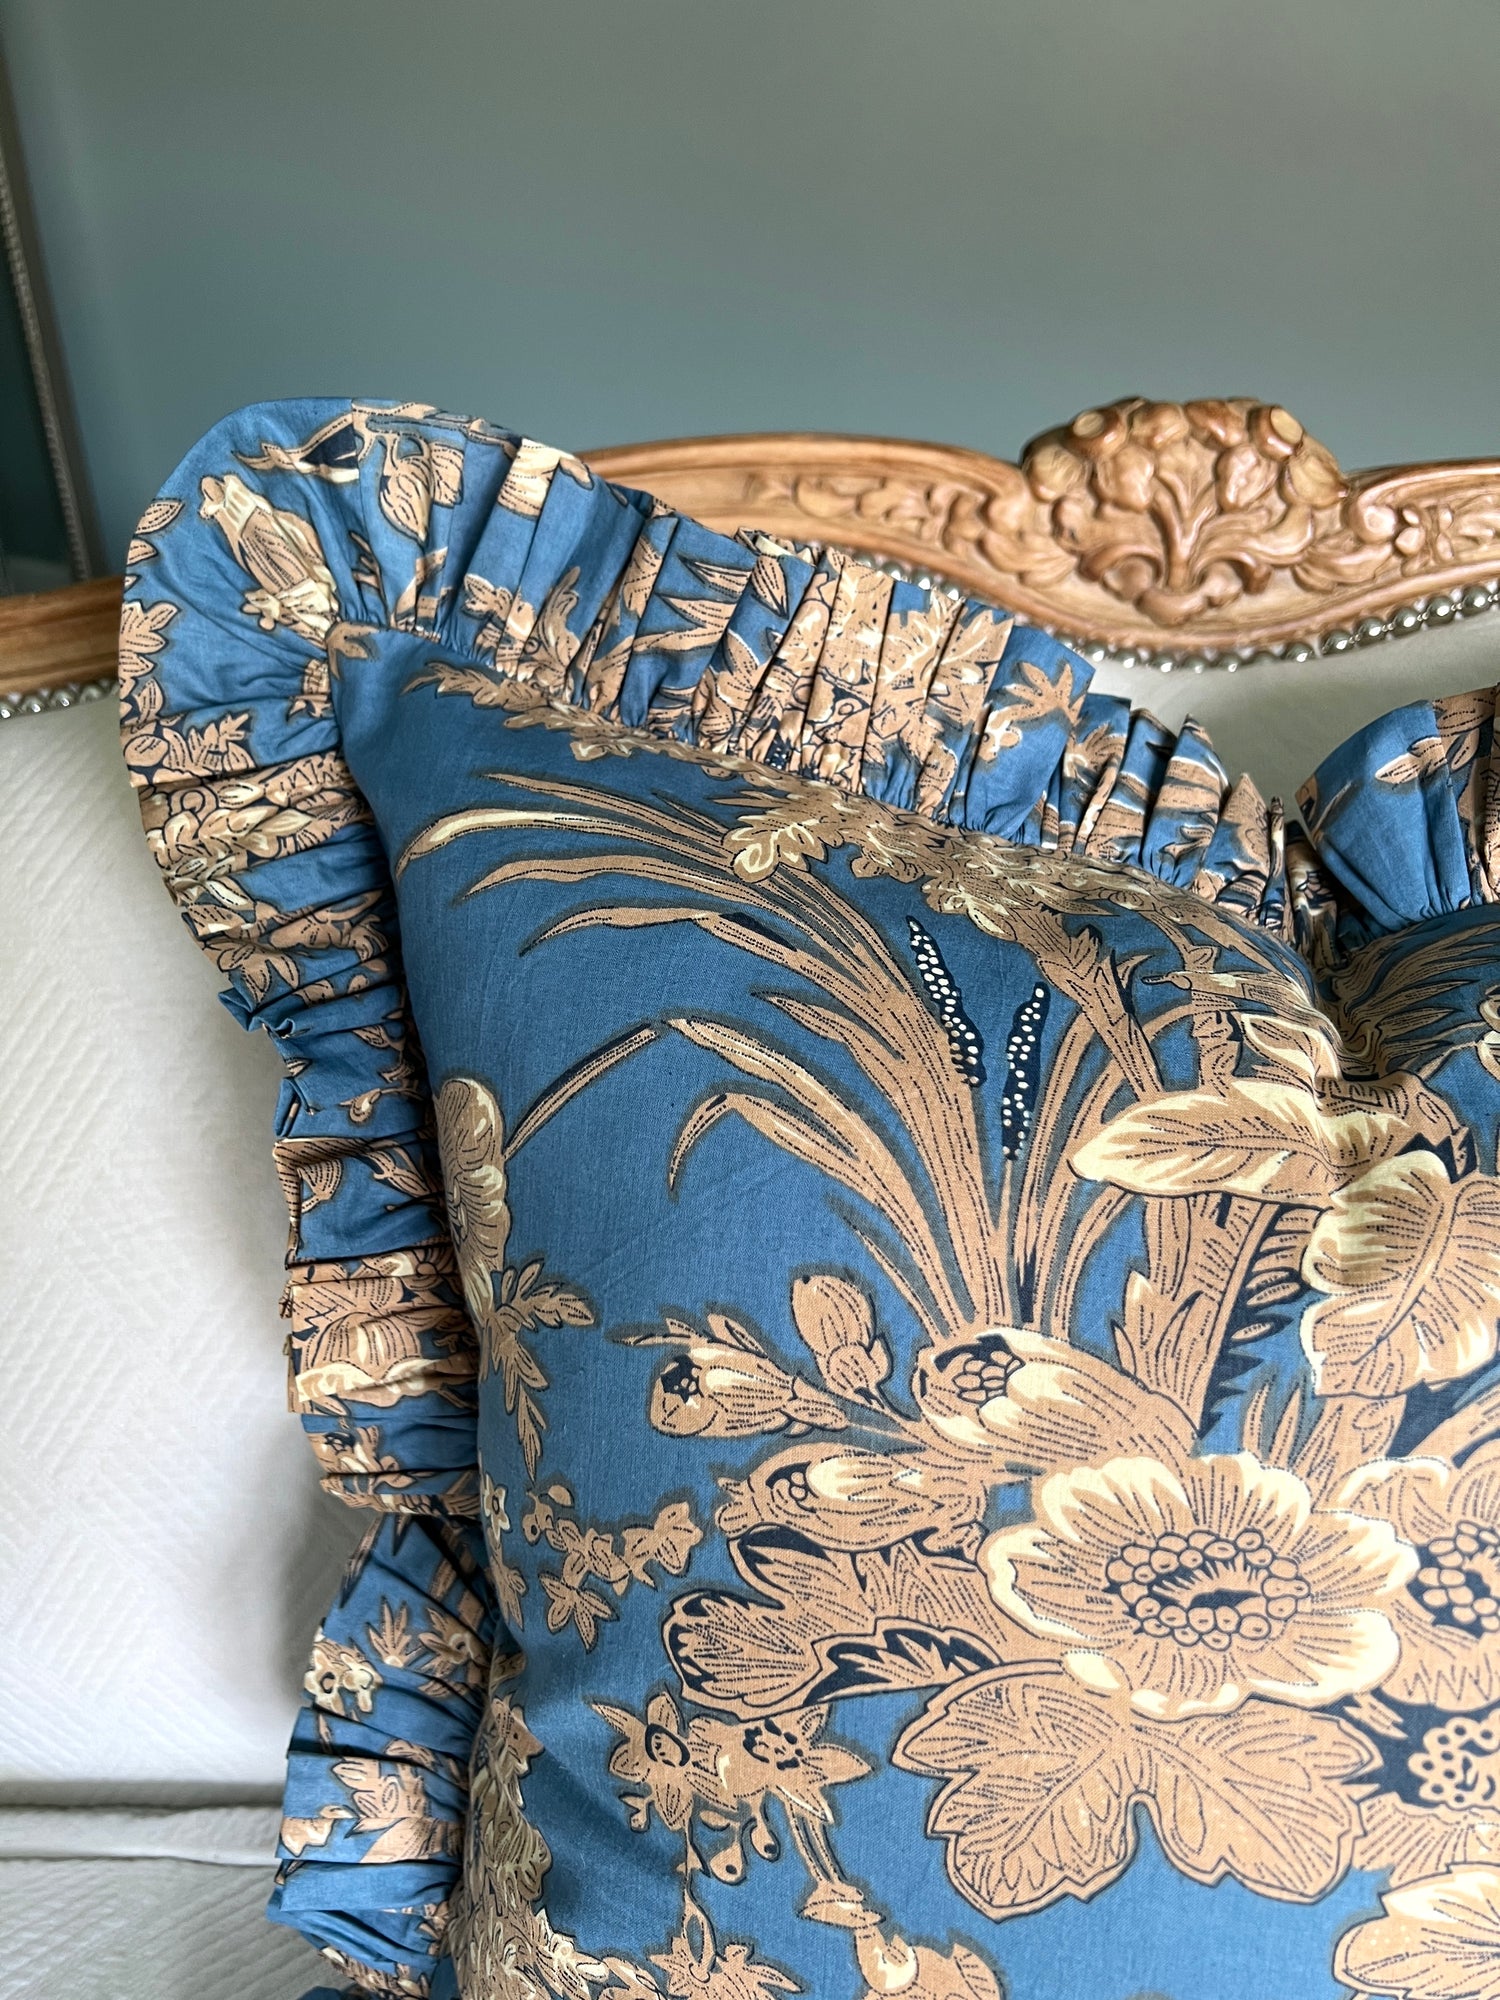 Blue floral toile pillow cover with ruffle trim